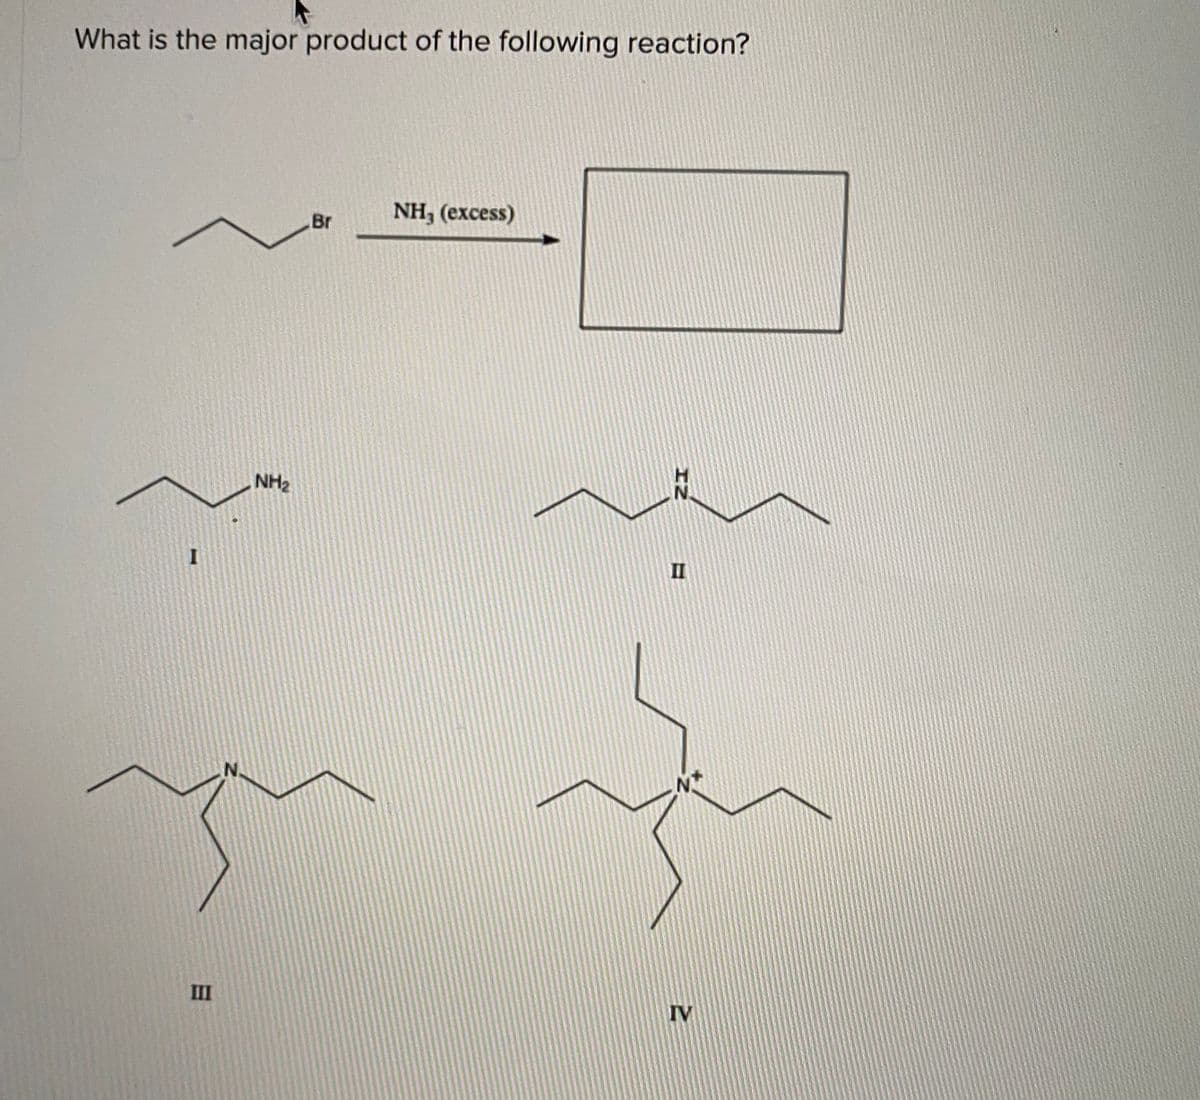 What is the major product of the following reaction?
Br
NH, (еxcess)
NH2
N.
II
III
IV
